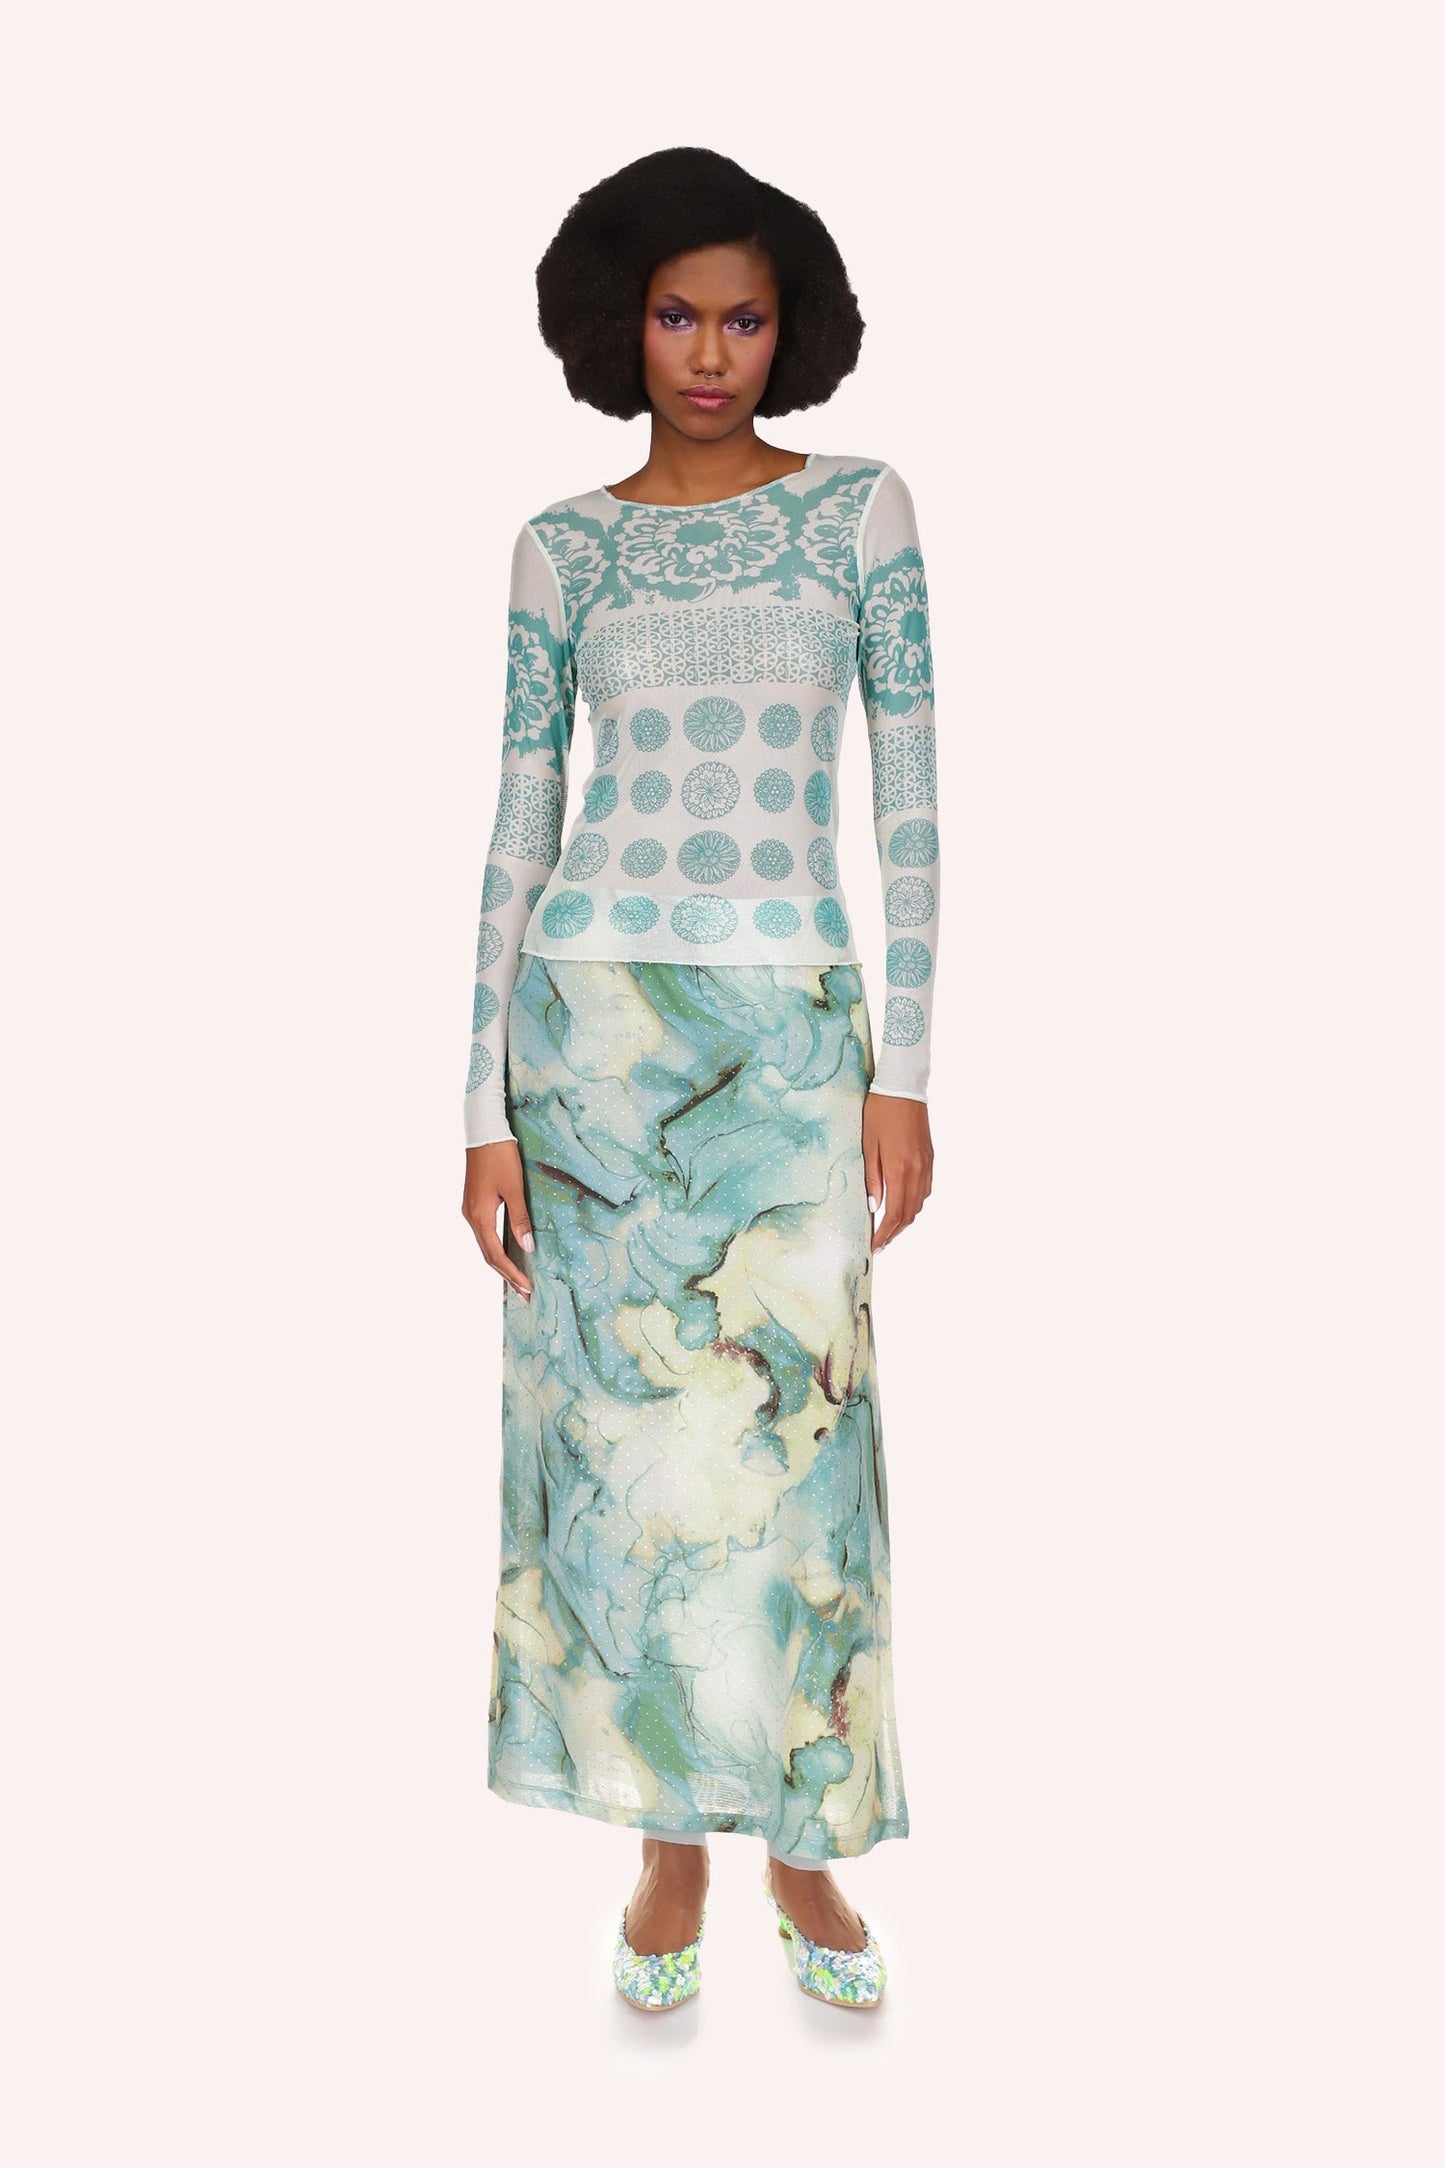 Printed Chrysanthemum Mesh Top, in a very light turquoise color, fit like a second skin